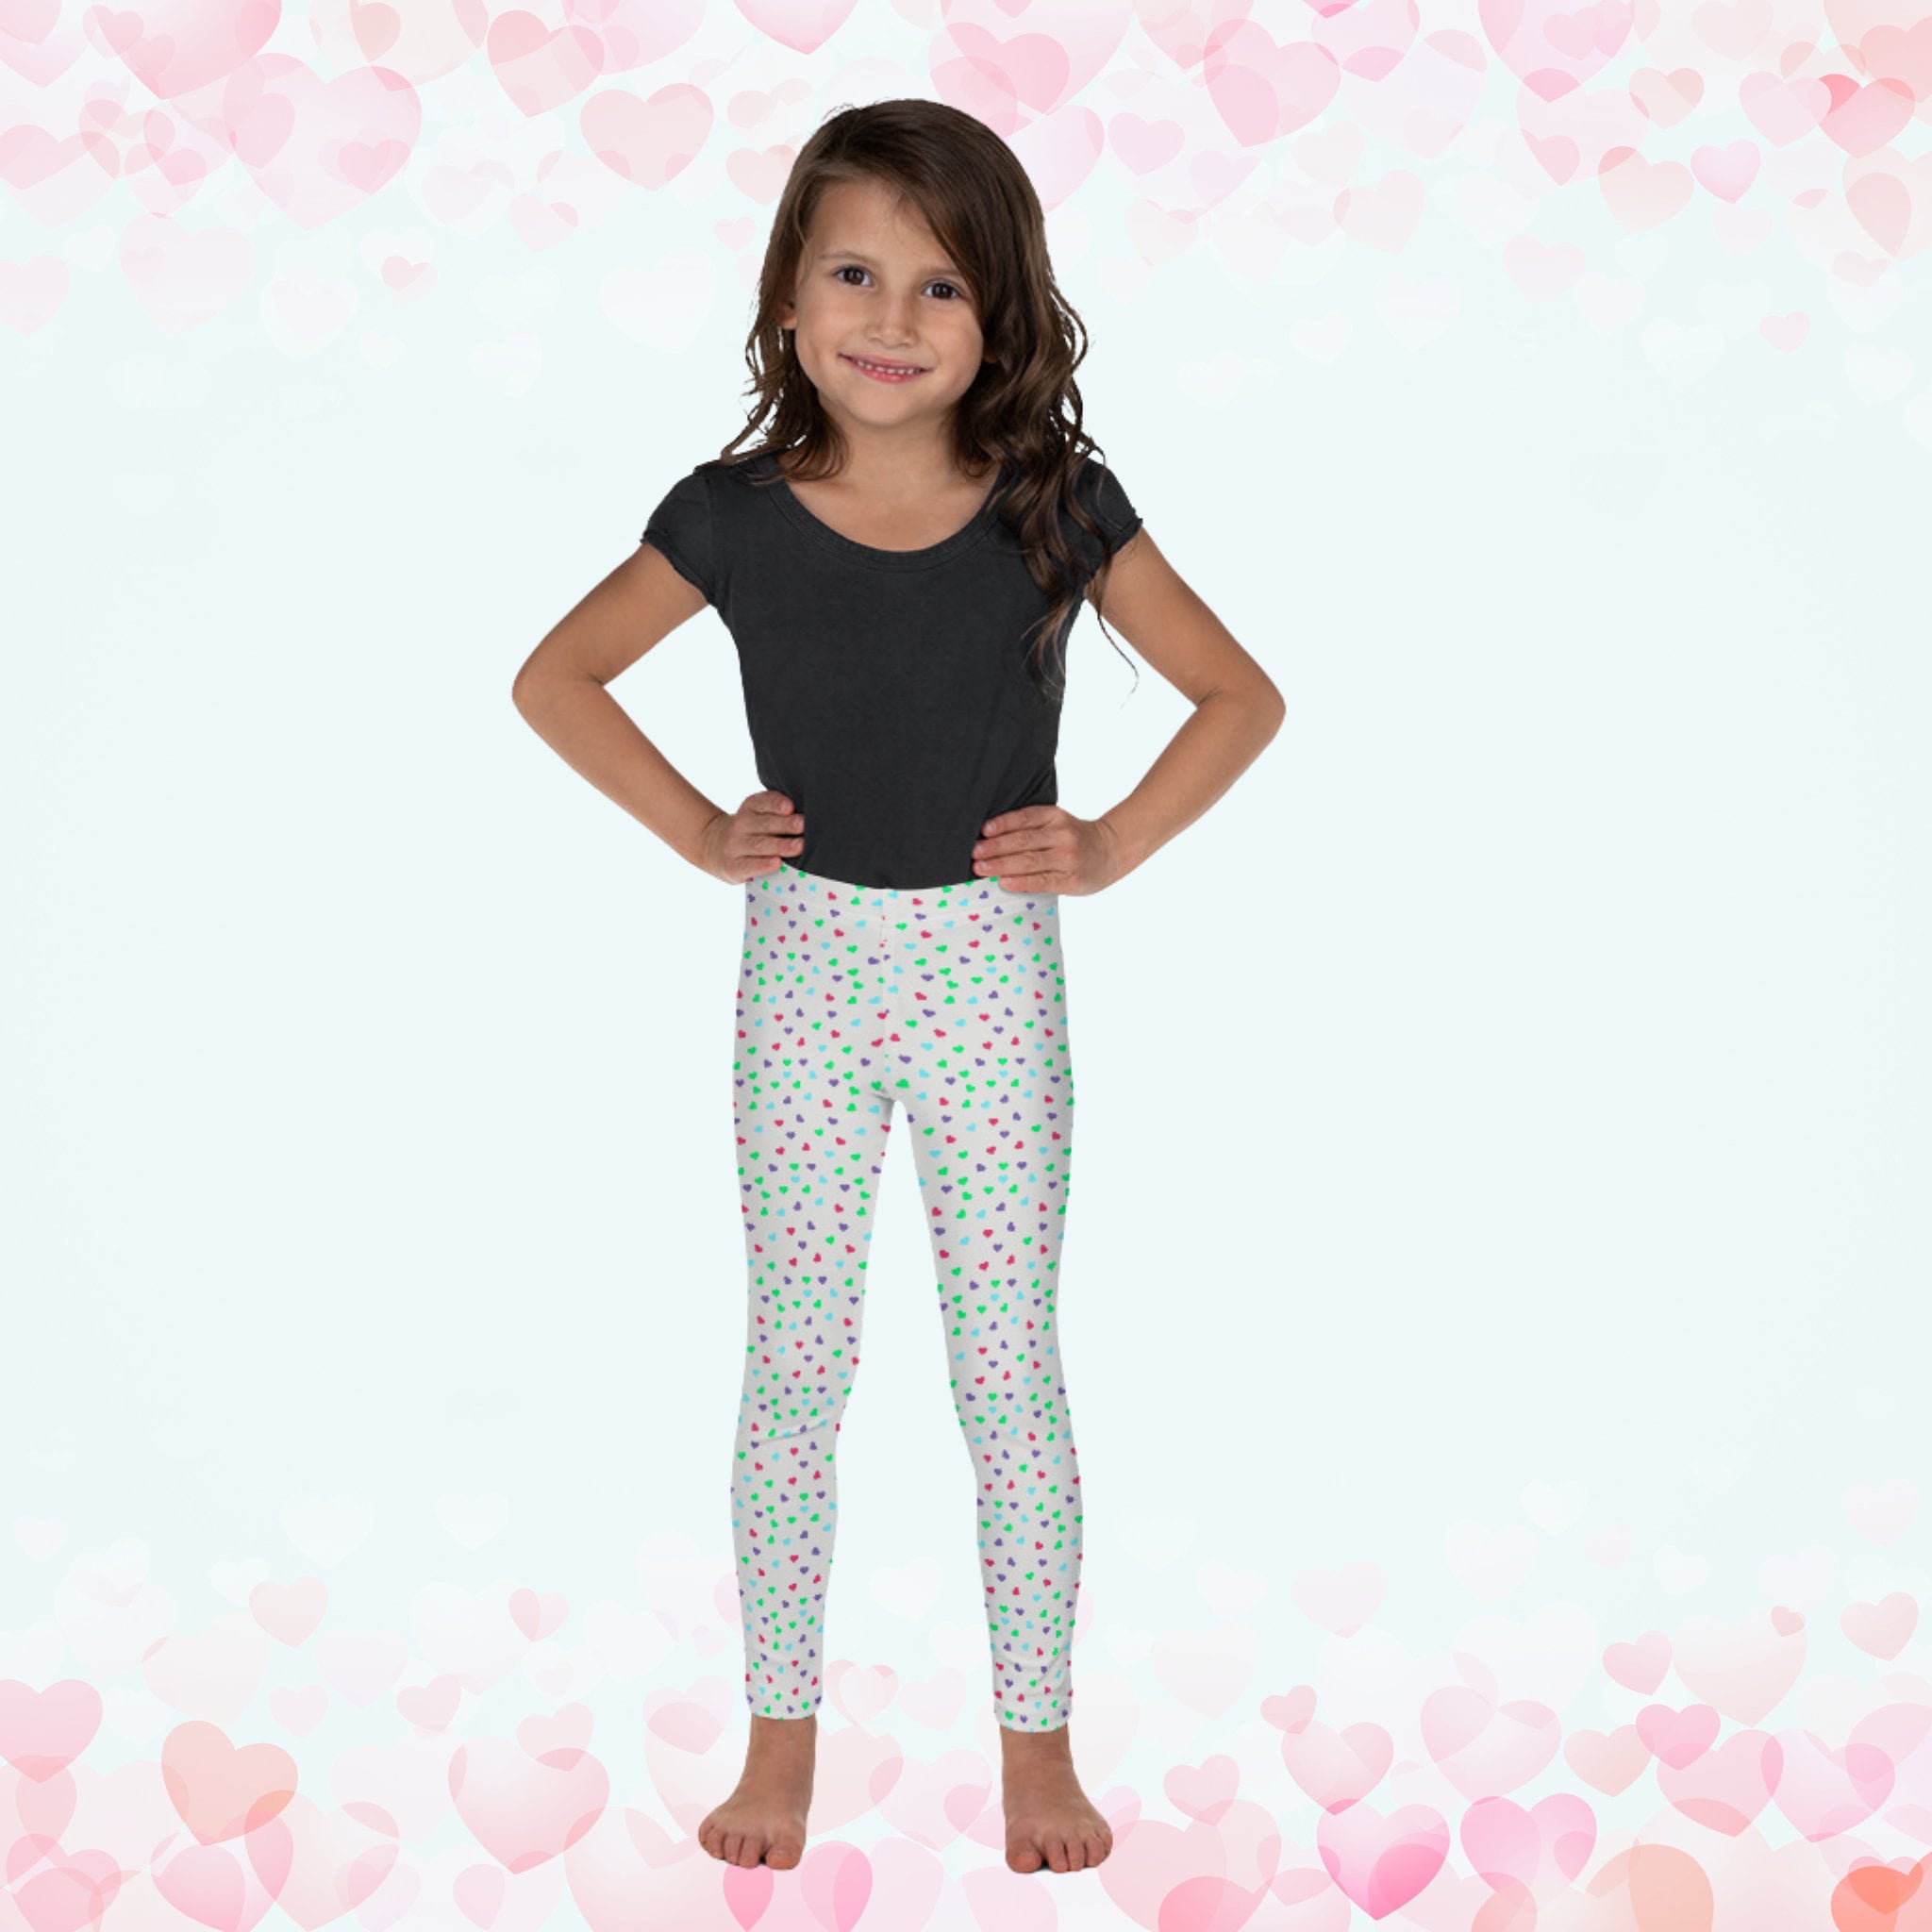 Little Hearts Girls Leggings, Colorful Hearts Leggings for Toddlers, Kids  Leggings With Tiny Hearts, Toddler Stretchy Pants, Kids Dancewear 